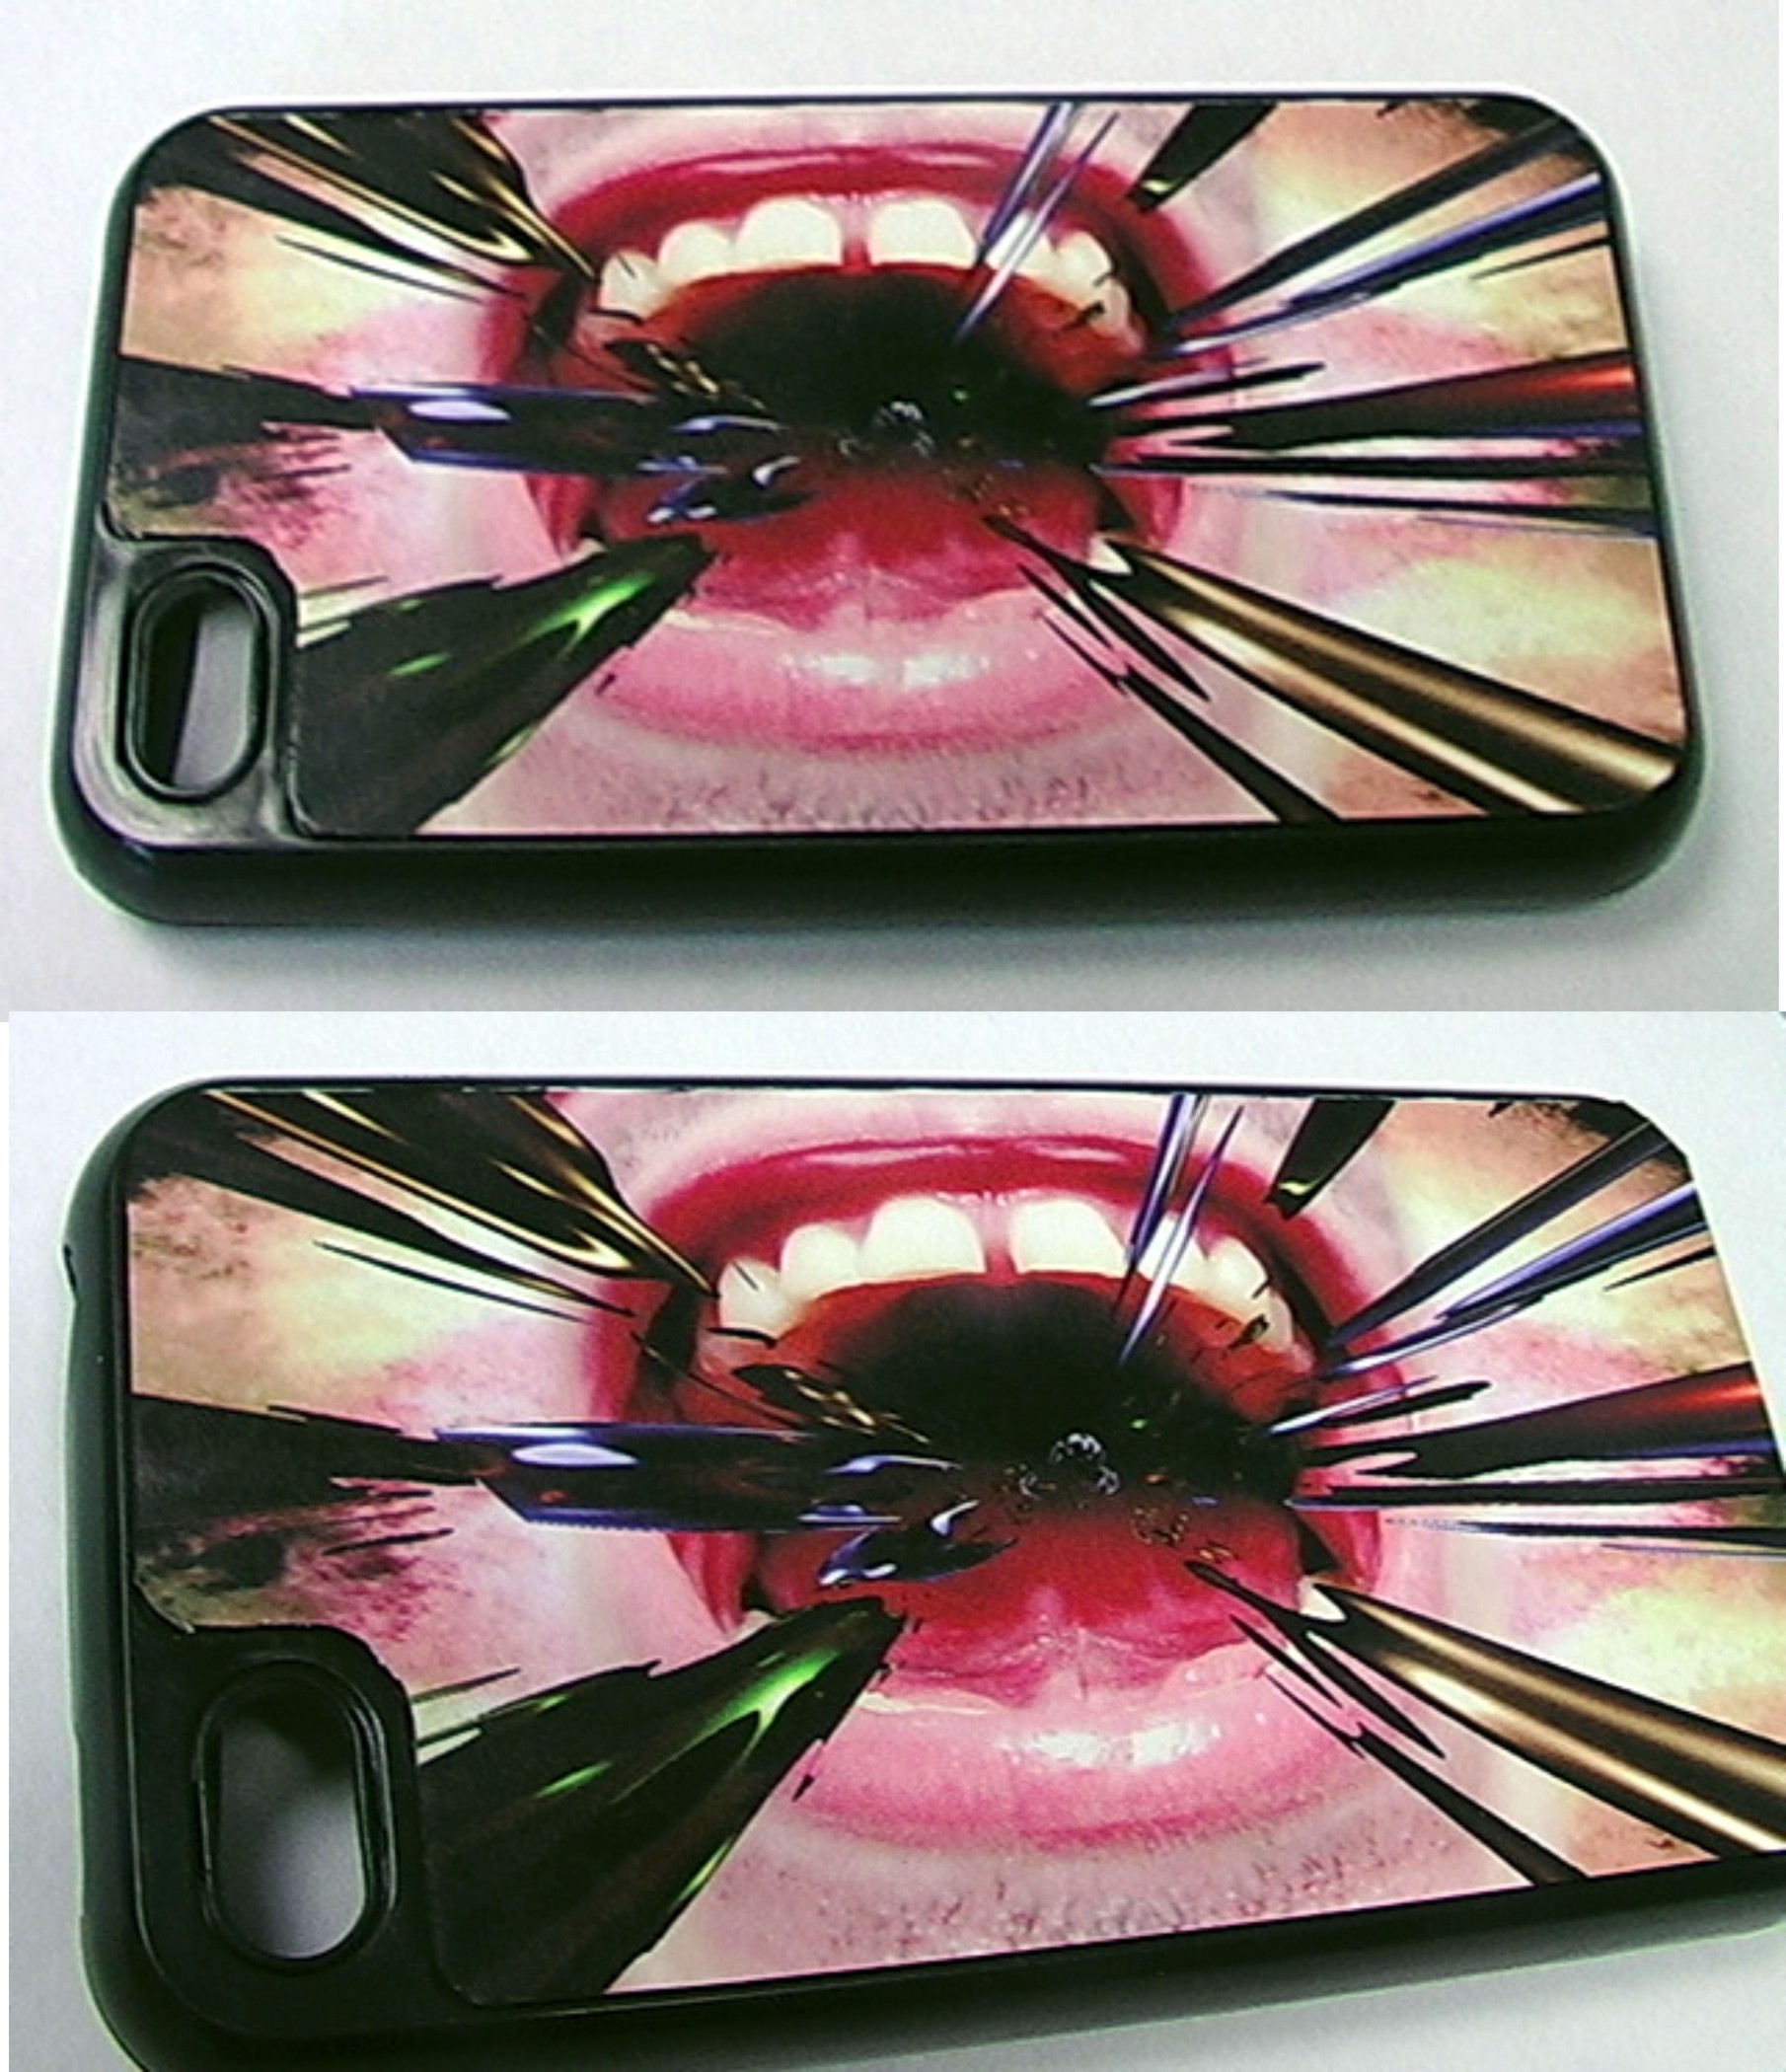 Mouth 4/4s cover - weird made with sublimation printing